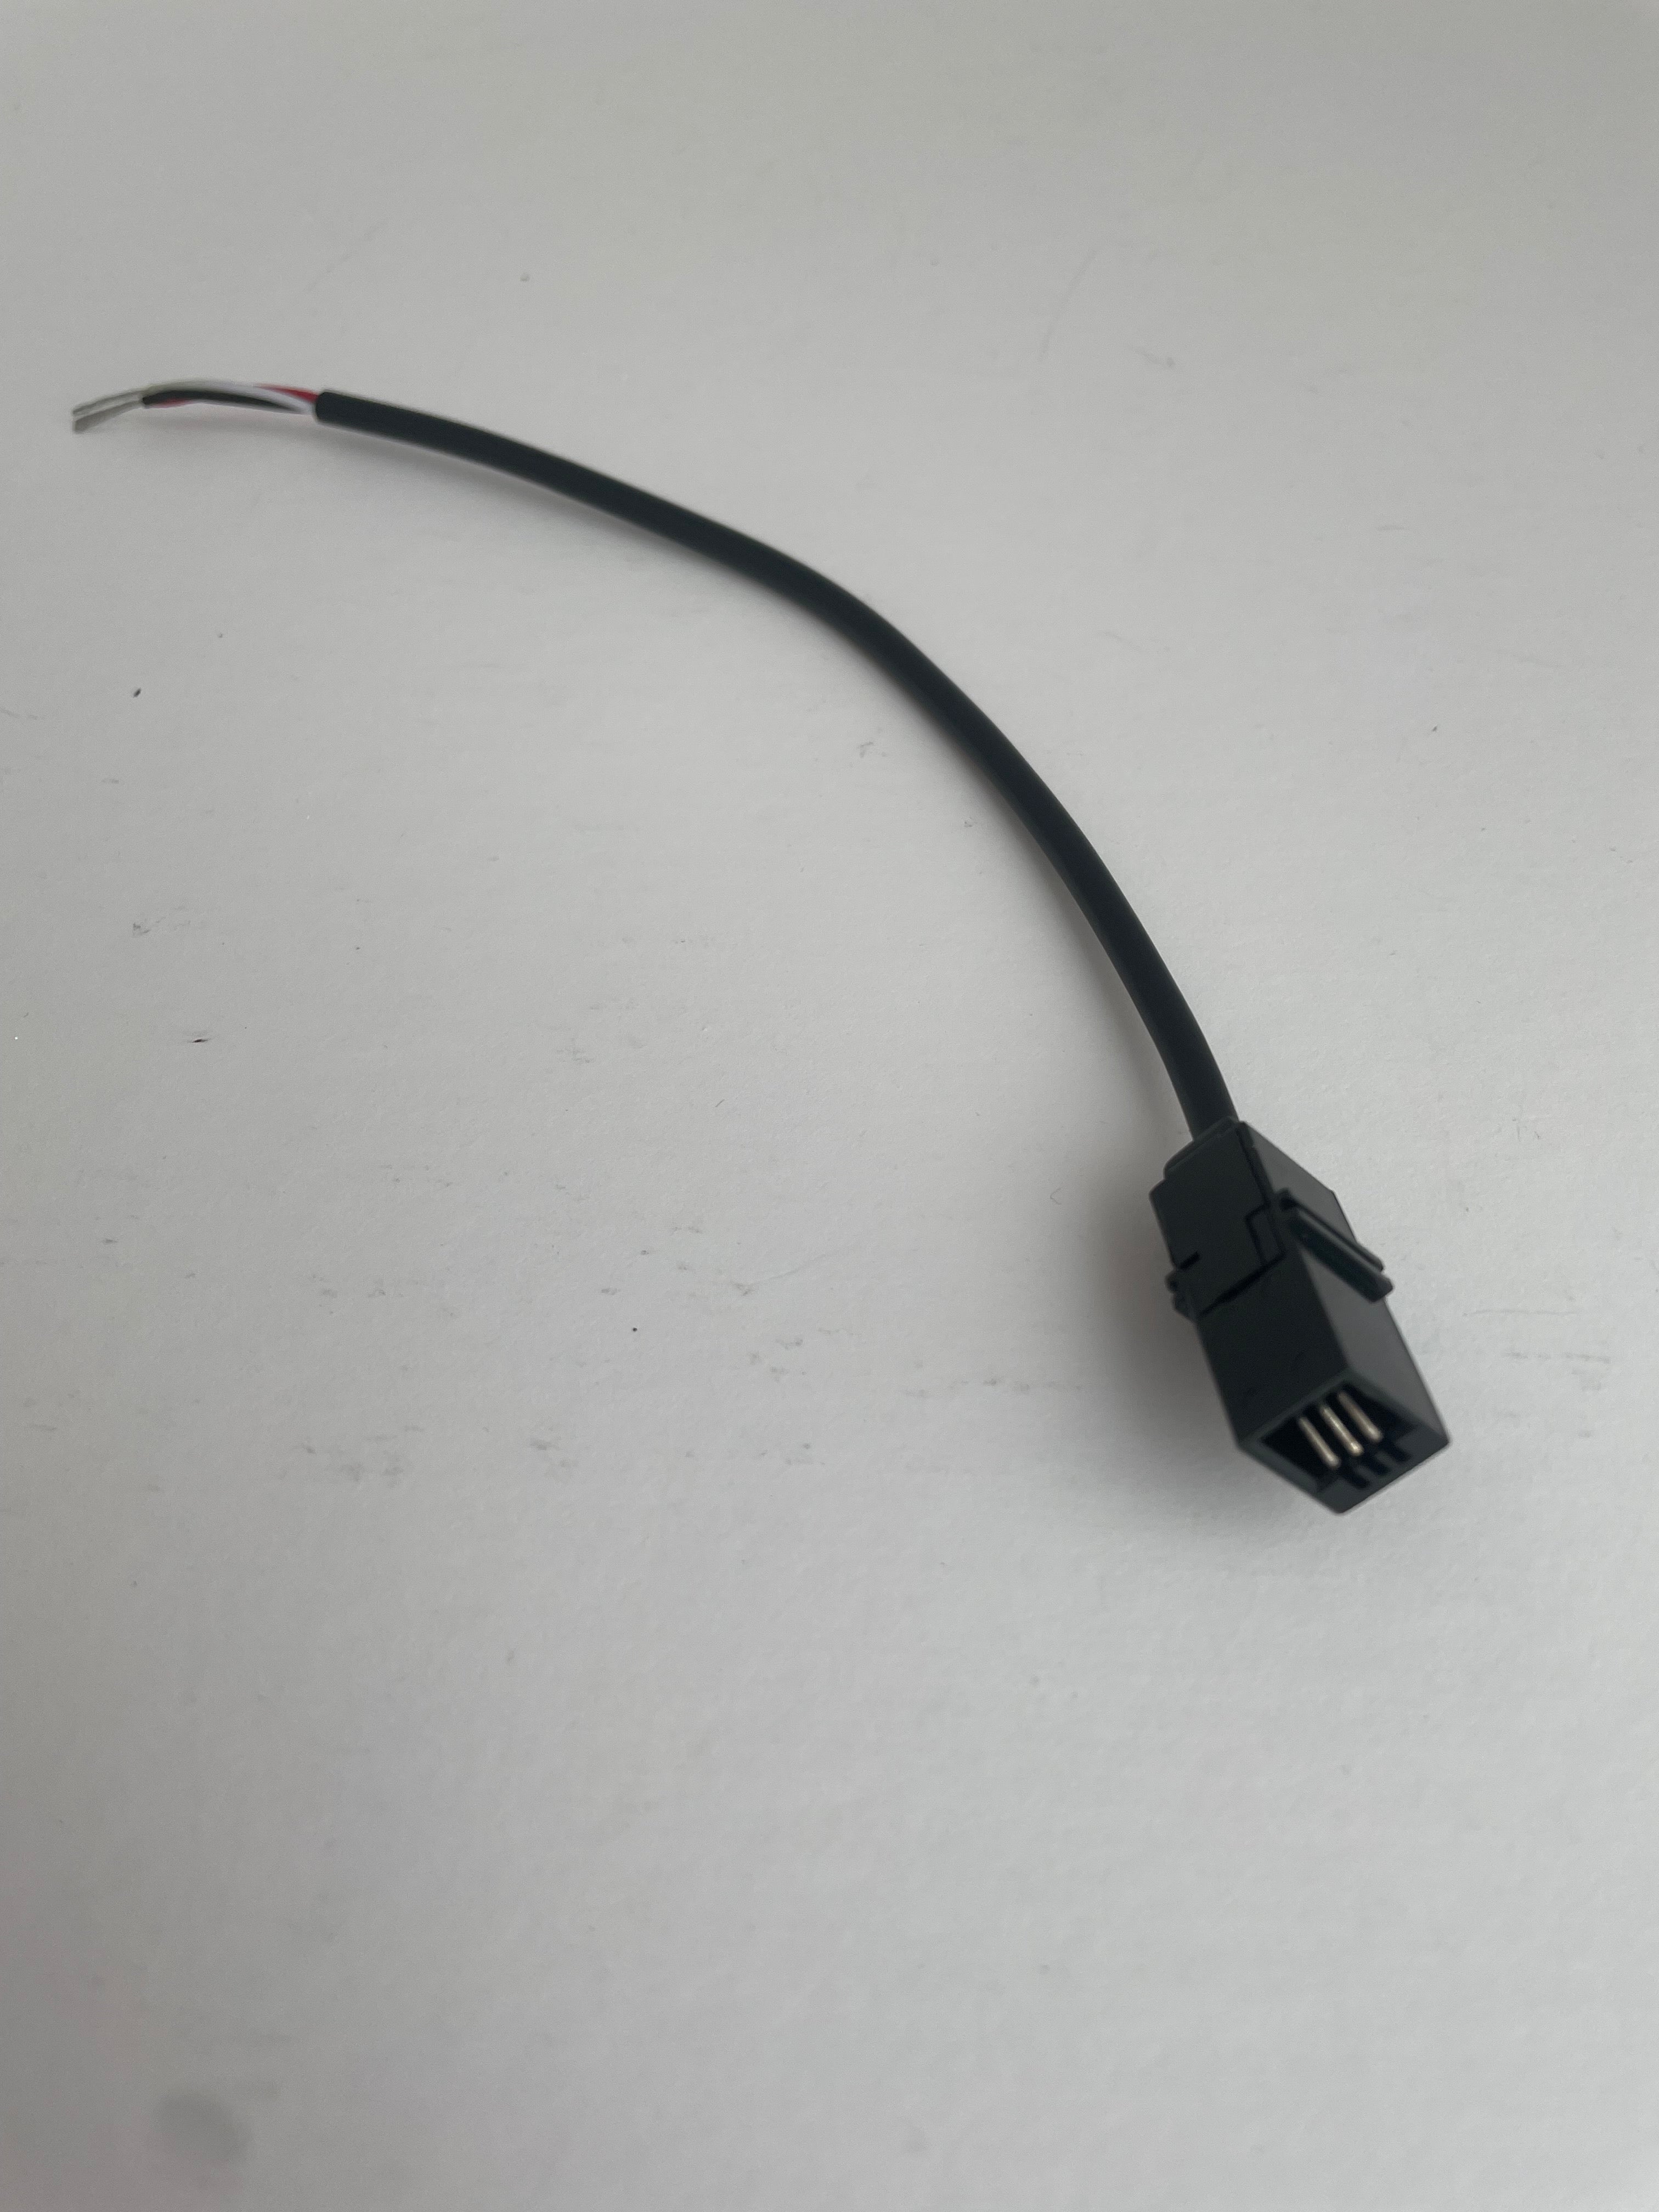 8" Female Pigtail Power Cable